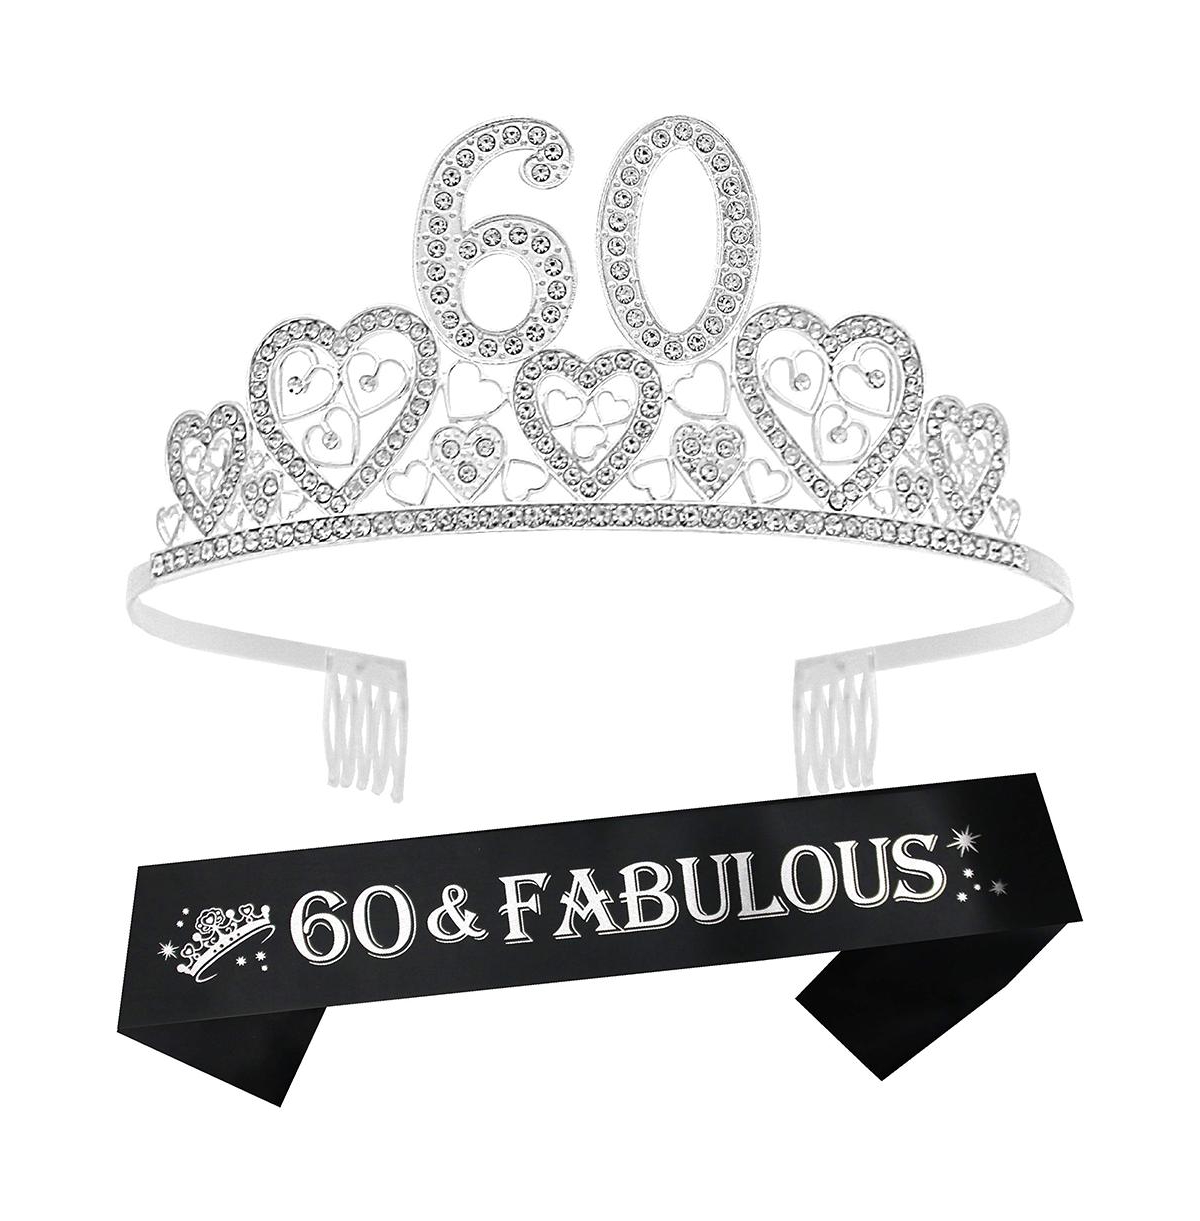 60th Birthday Sash and Tiara for Women - Perfect for Her Birthday Party Celebration and Gifts - Silver